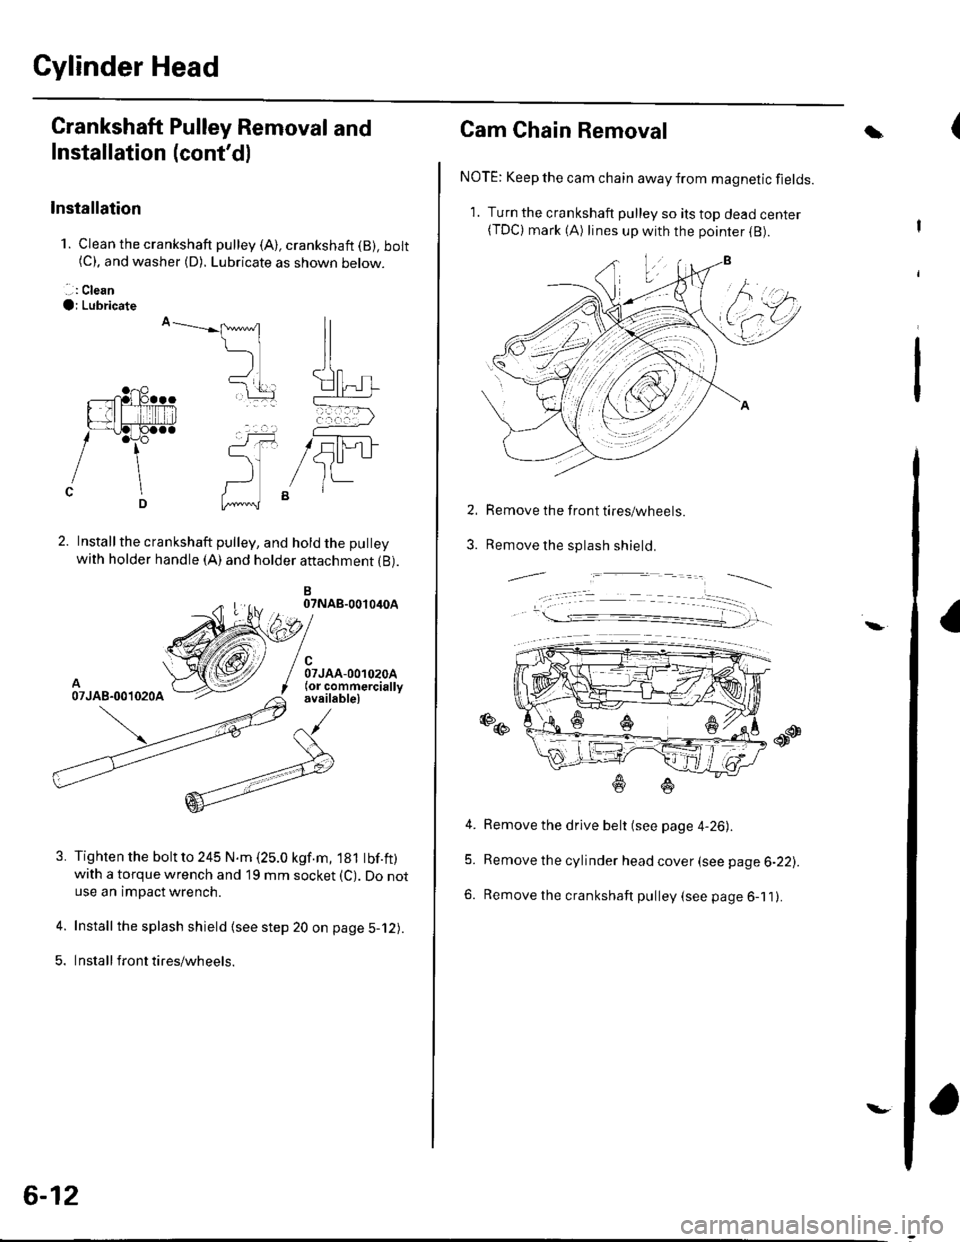 HONDA CIVIC 2002 7.G Workshop Manual Cylinder Head
Crankshaft Pulley Removal and
Installation (contdl
Installation
1. Clean the crankshaft pulley (A), crankshaft (B), bolt(C). and washer (D). Lubricate as shown below.
. .: Clean
O; Lubr